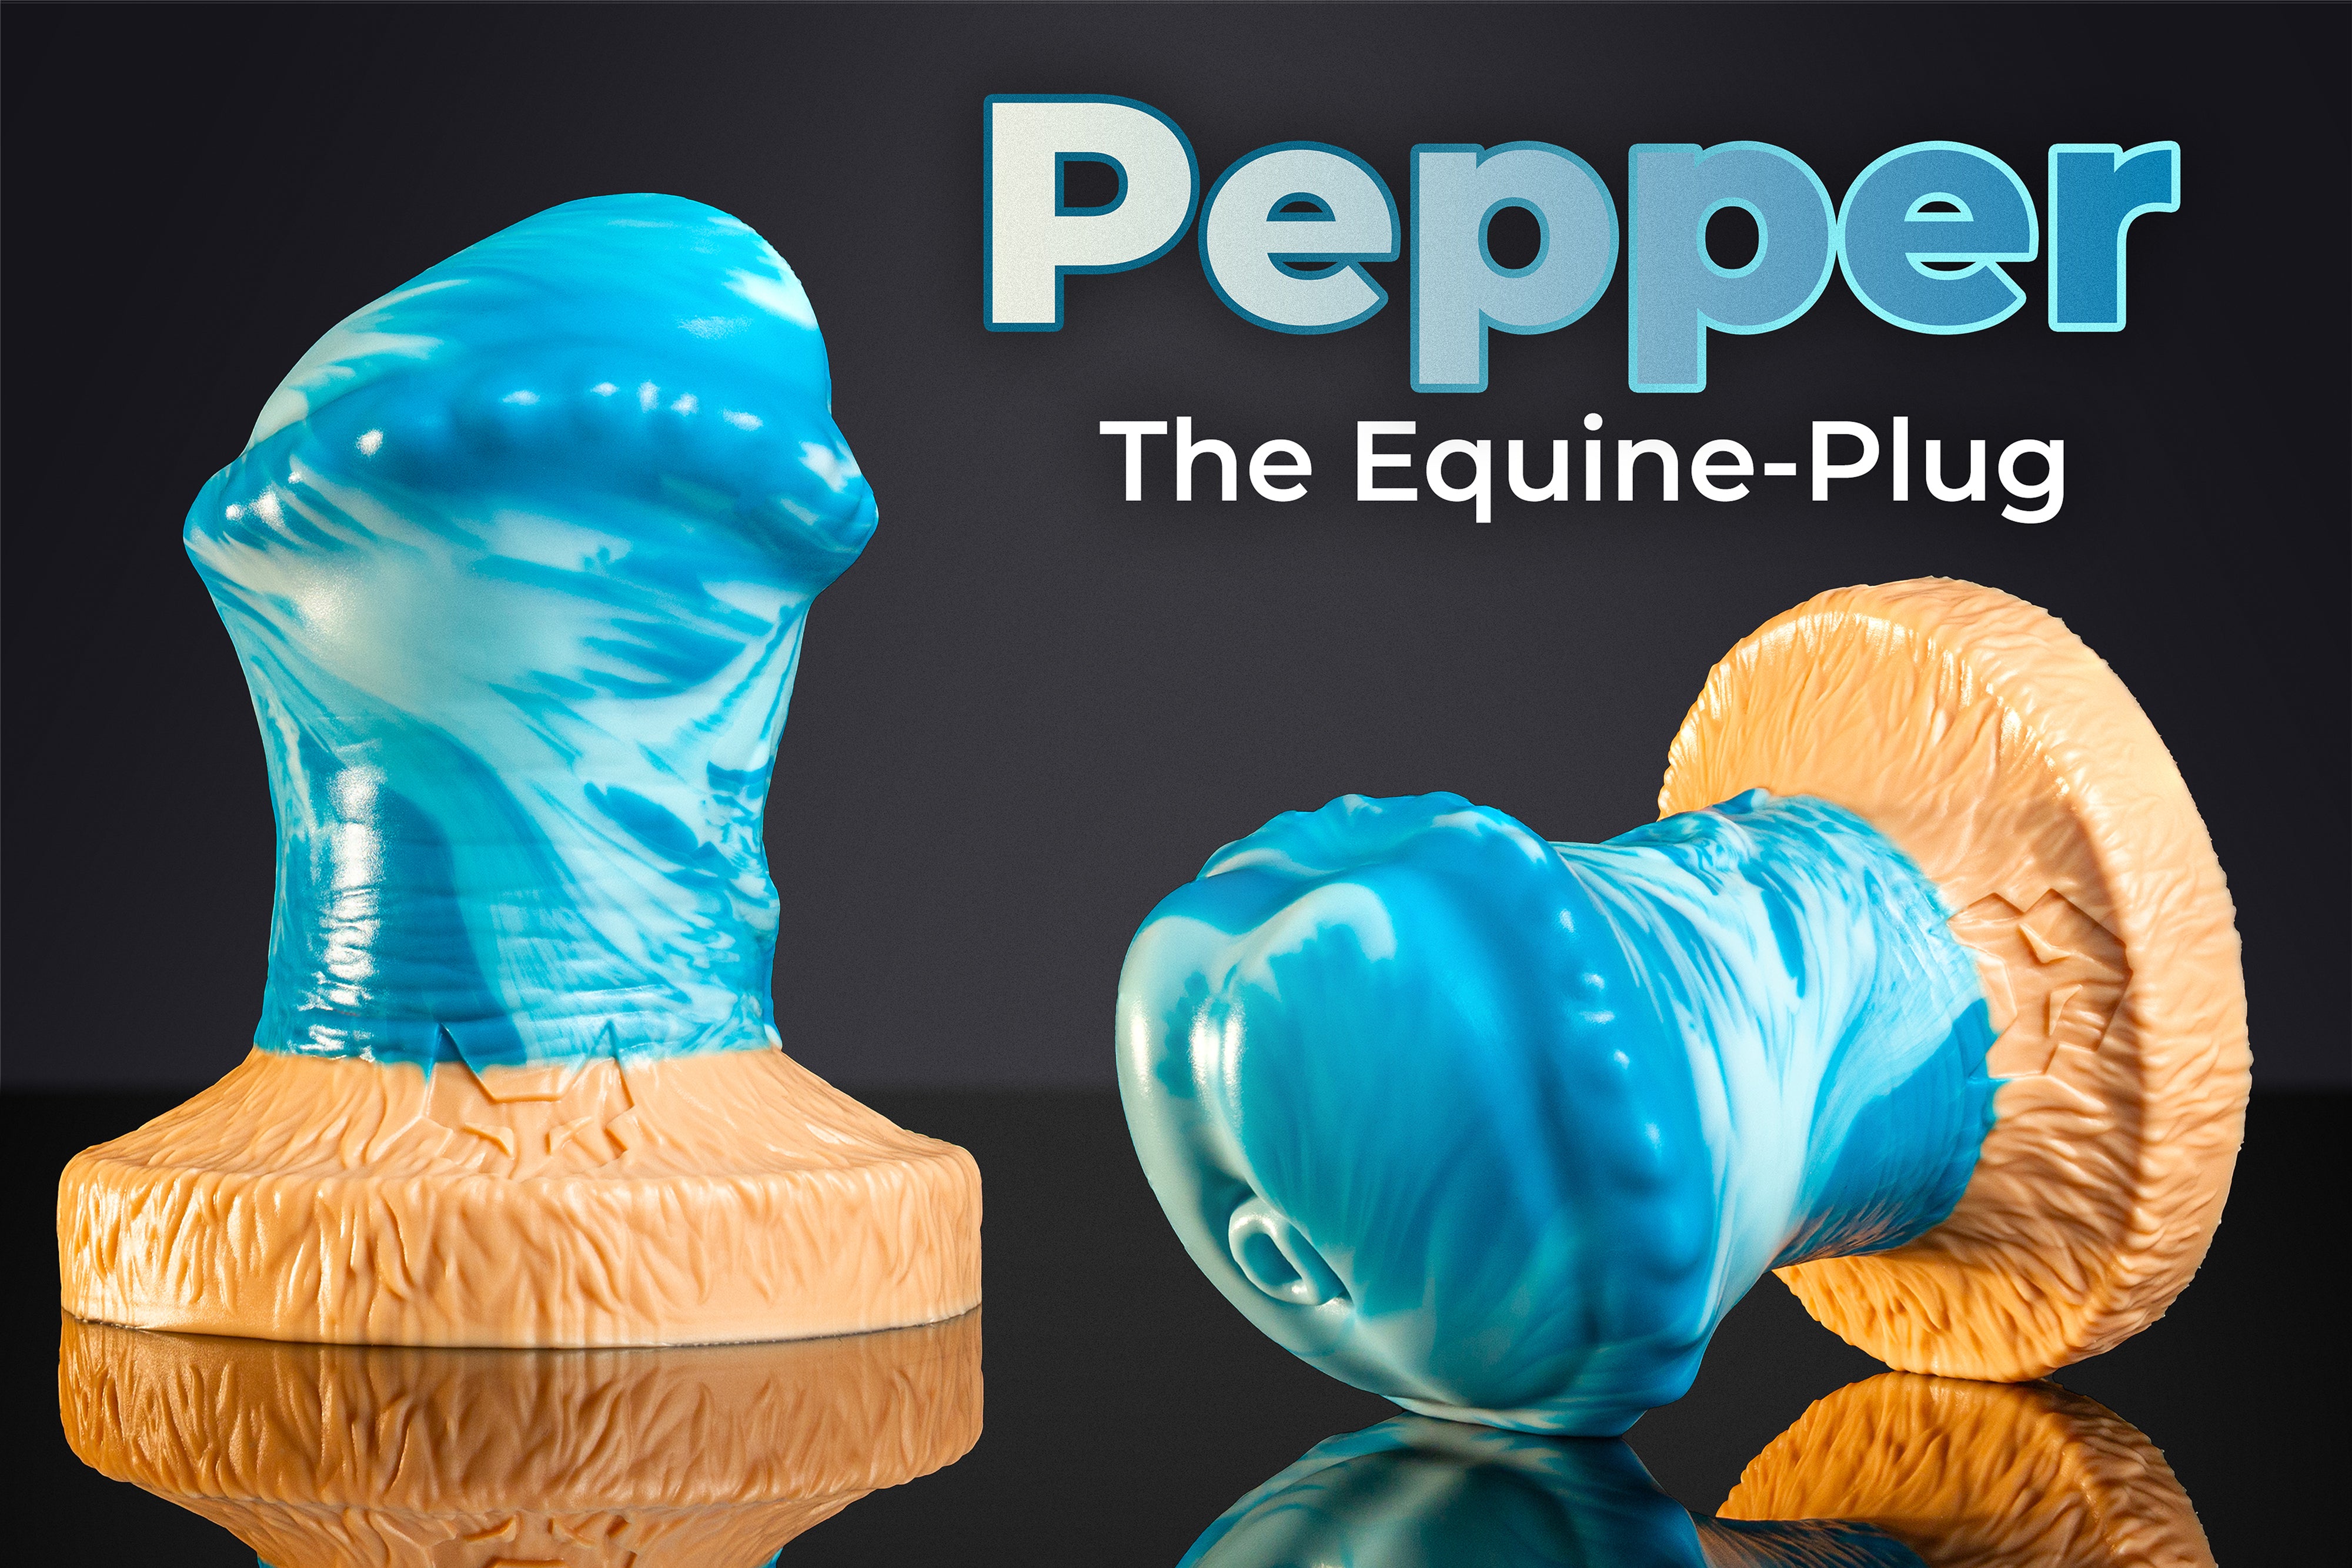 pepper the horse plug product image with product name